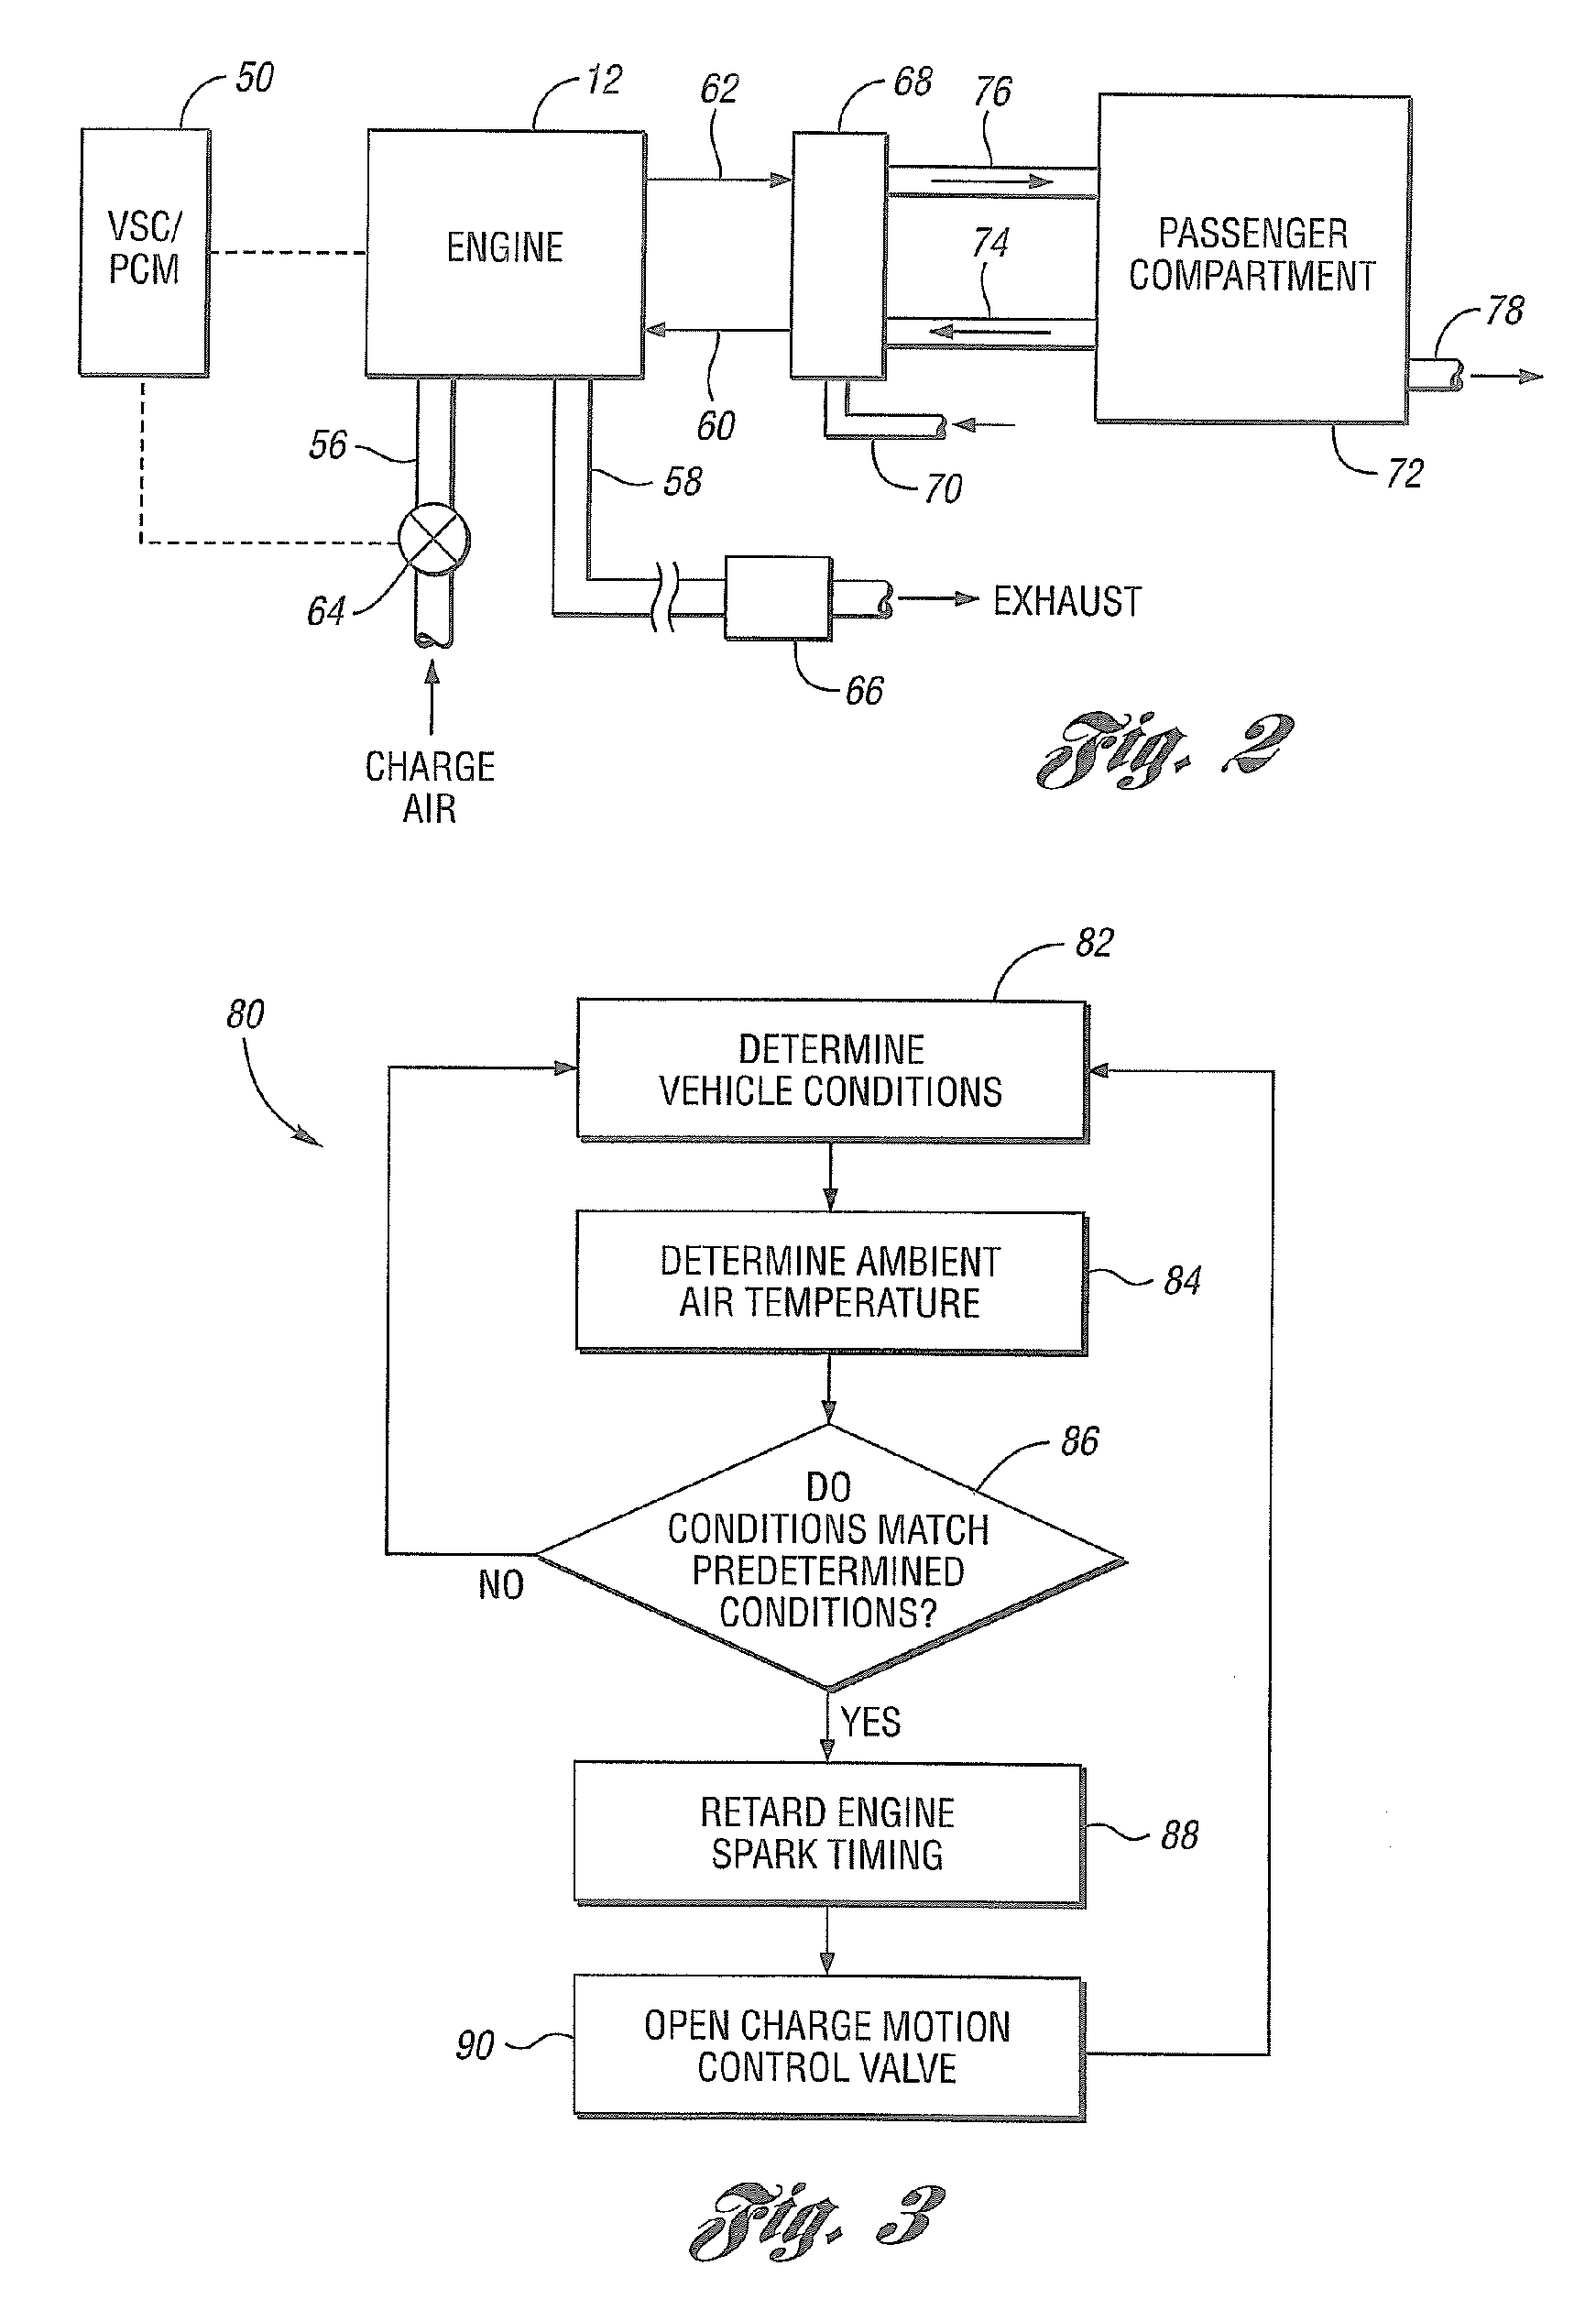 System and method for controlling an engine in a vehicle